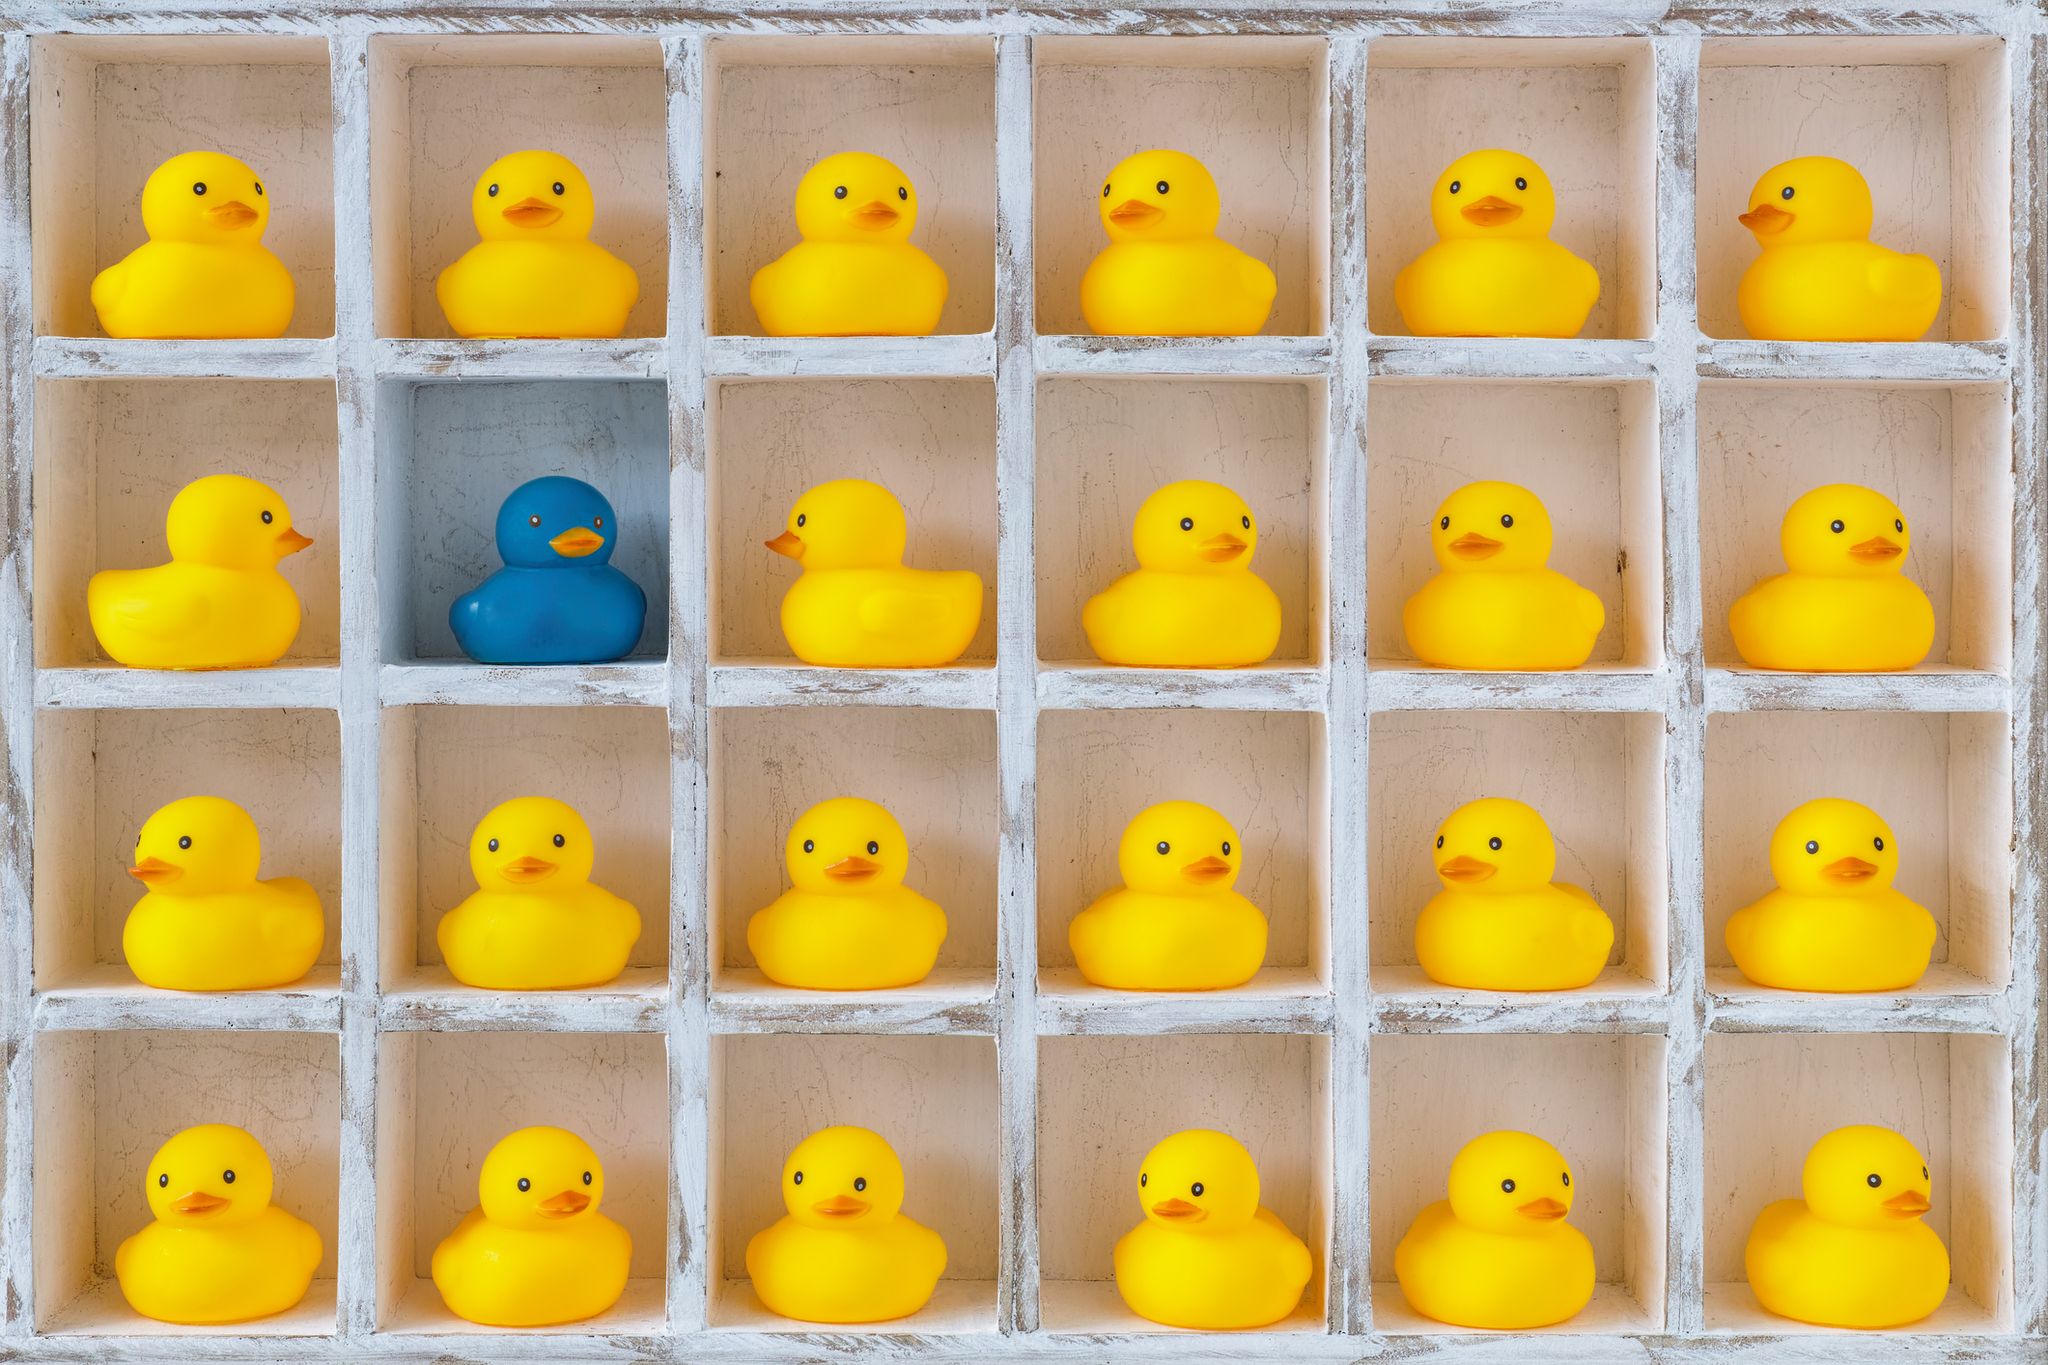 Small yellow rubber ducks in pigeon holes, one blue duck.